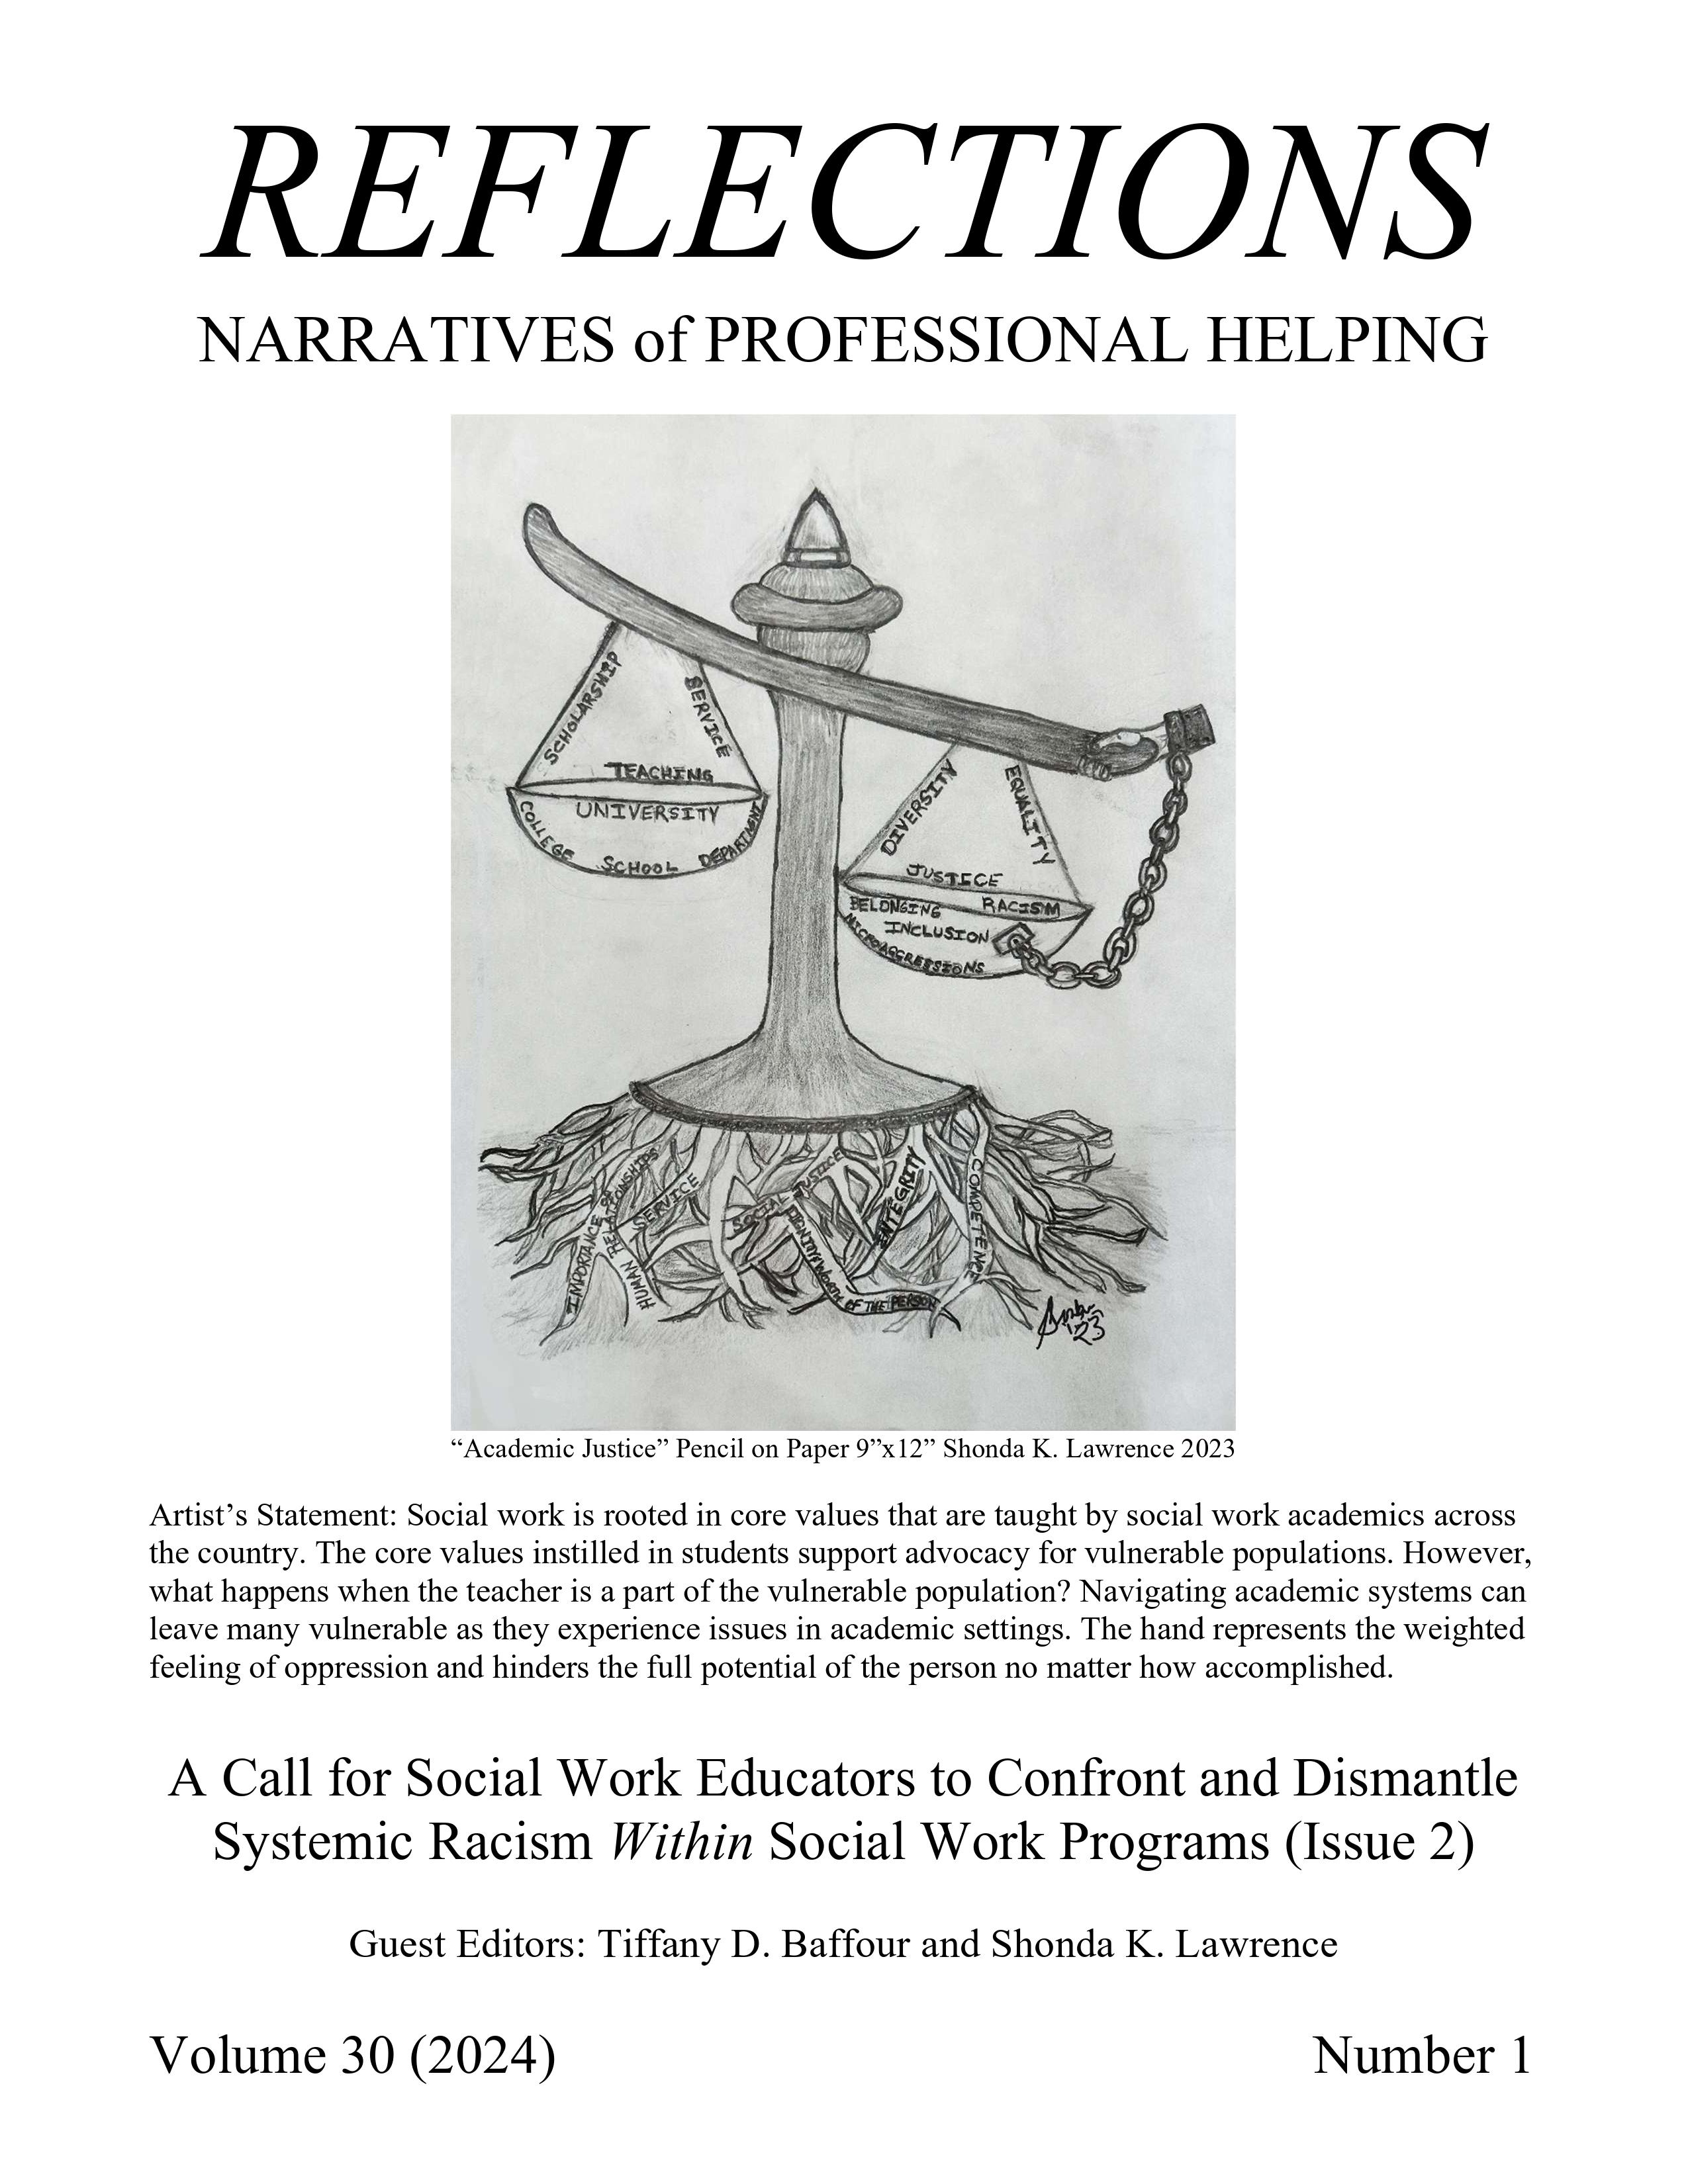 					View Vol. 30 No. 1 (2024): A Call for Social Work Educators to Confront and Dismantle Systemic Racism WITHIN Social Work Programs (Issue 2)
				